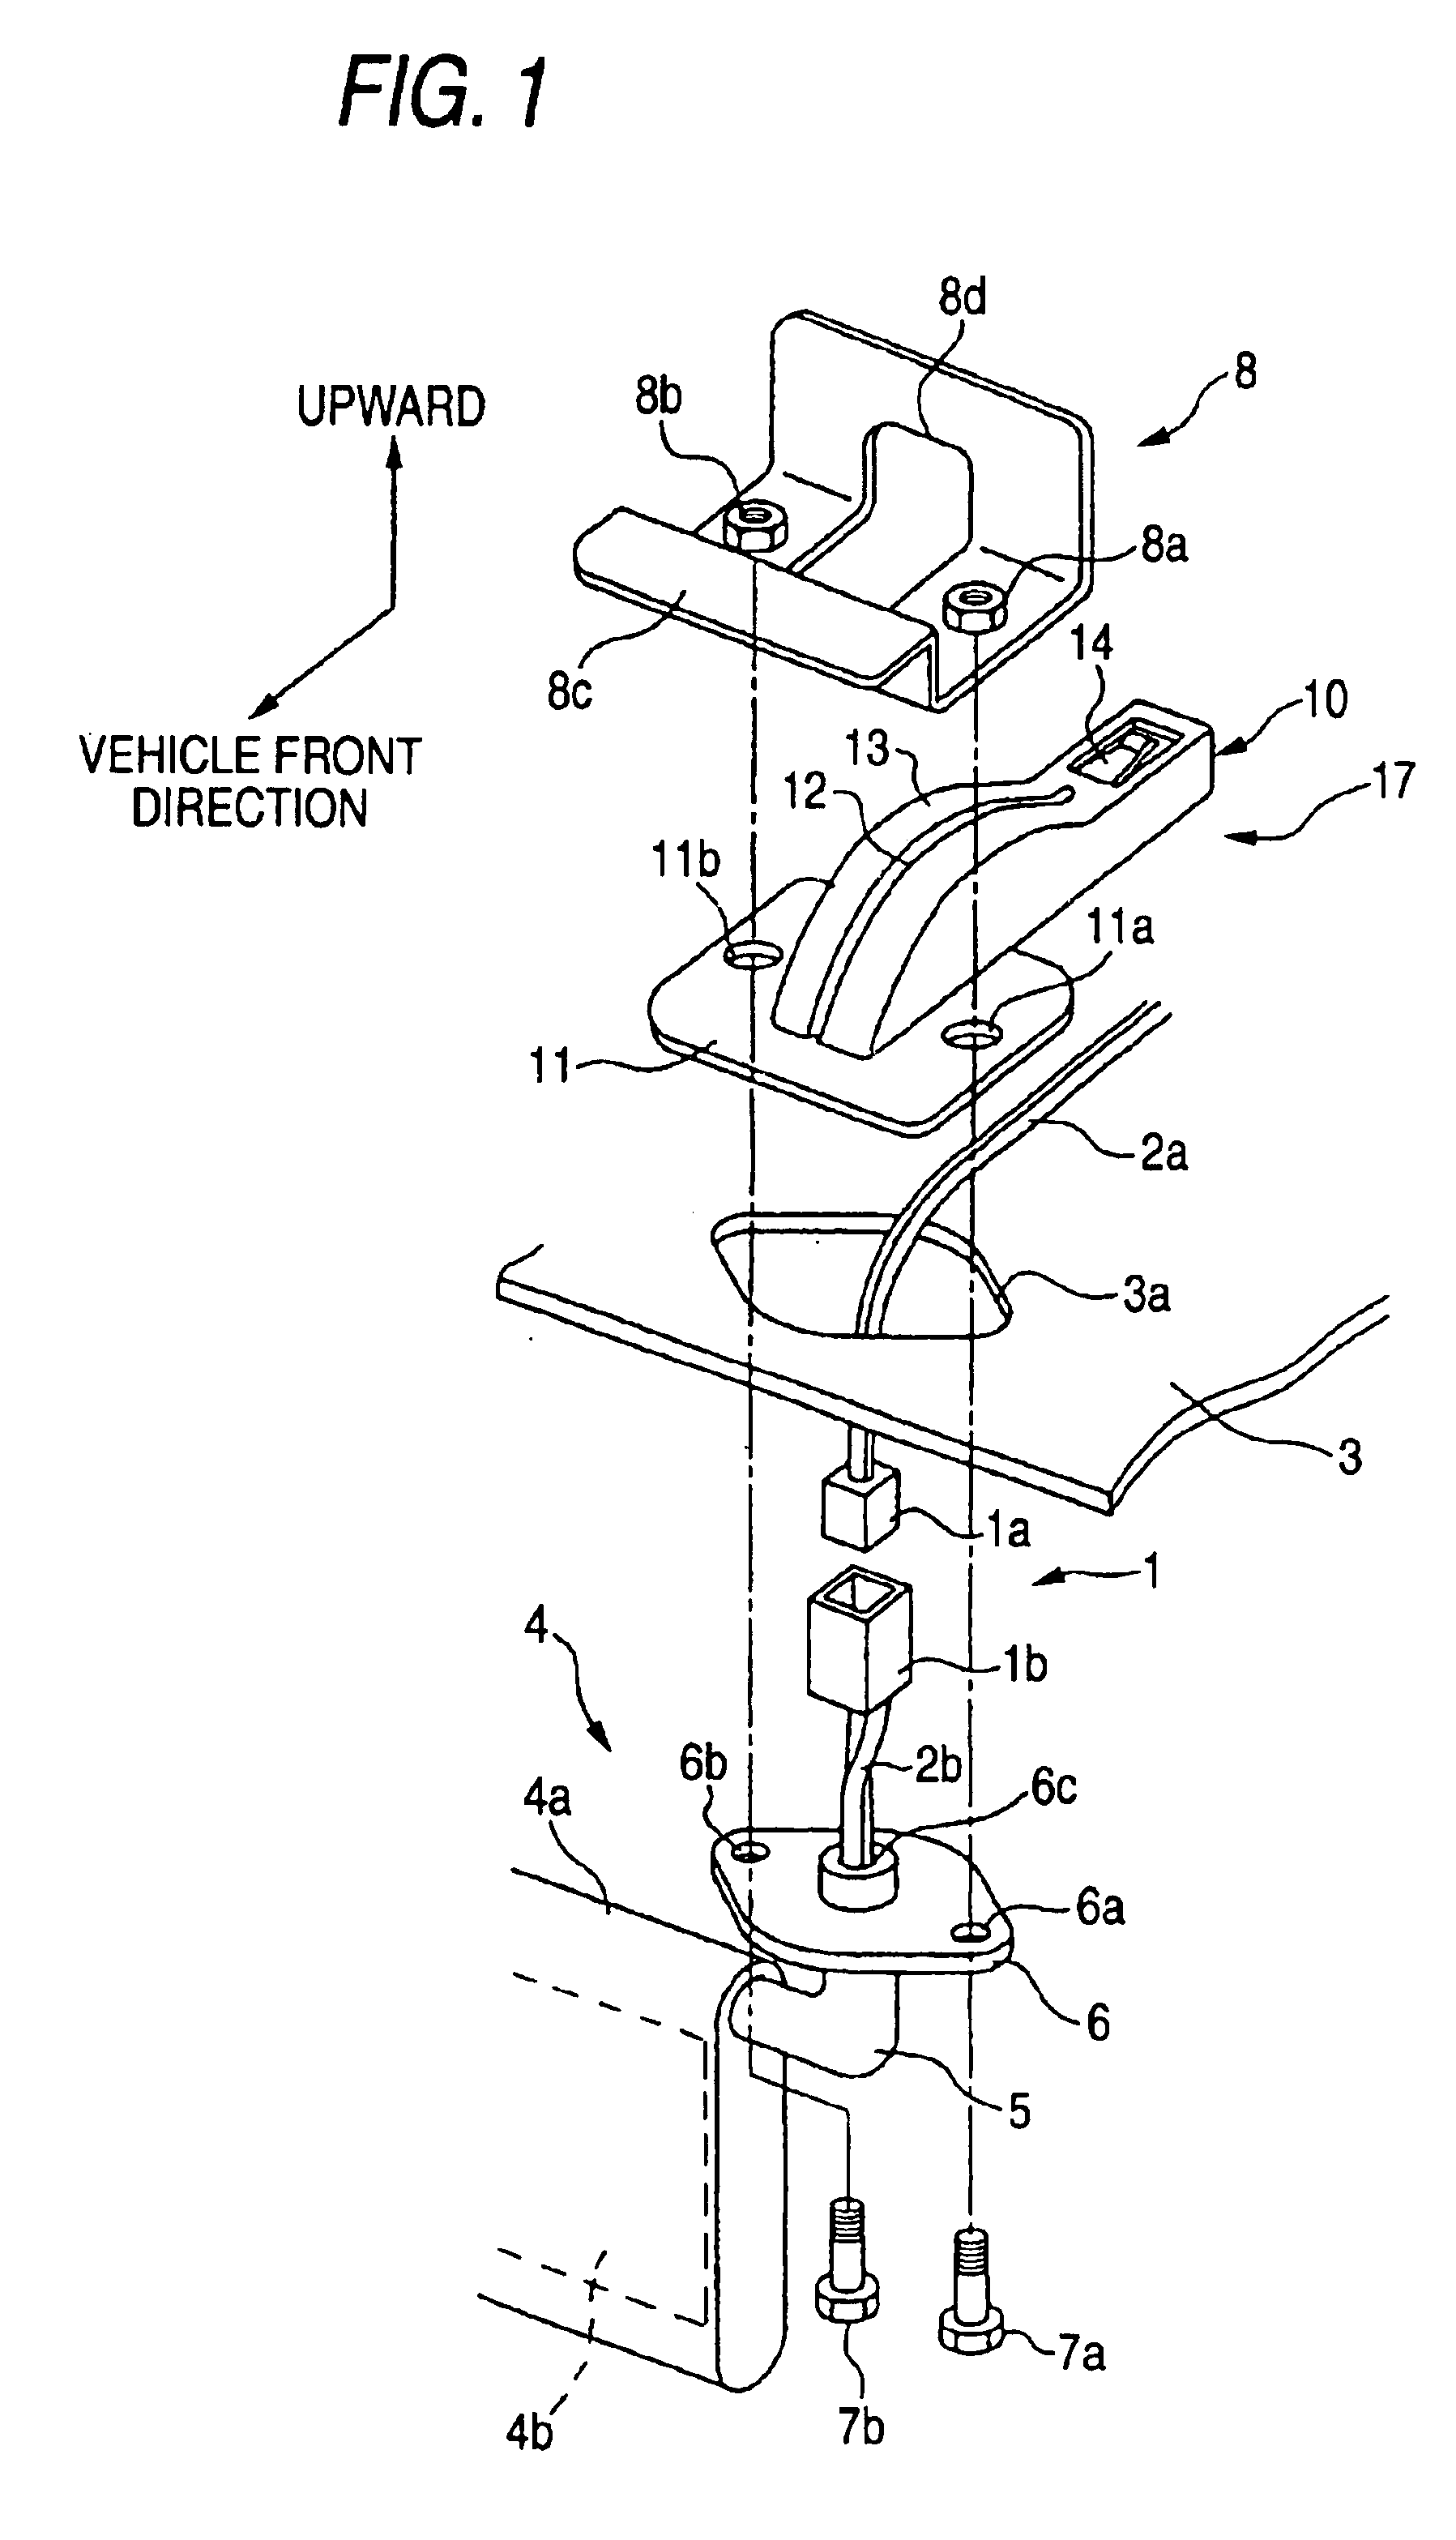 Connector holding structure